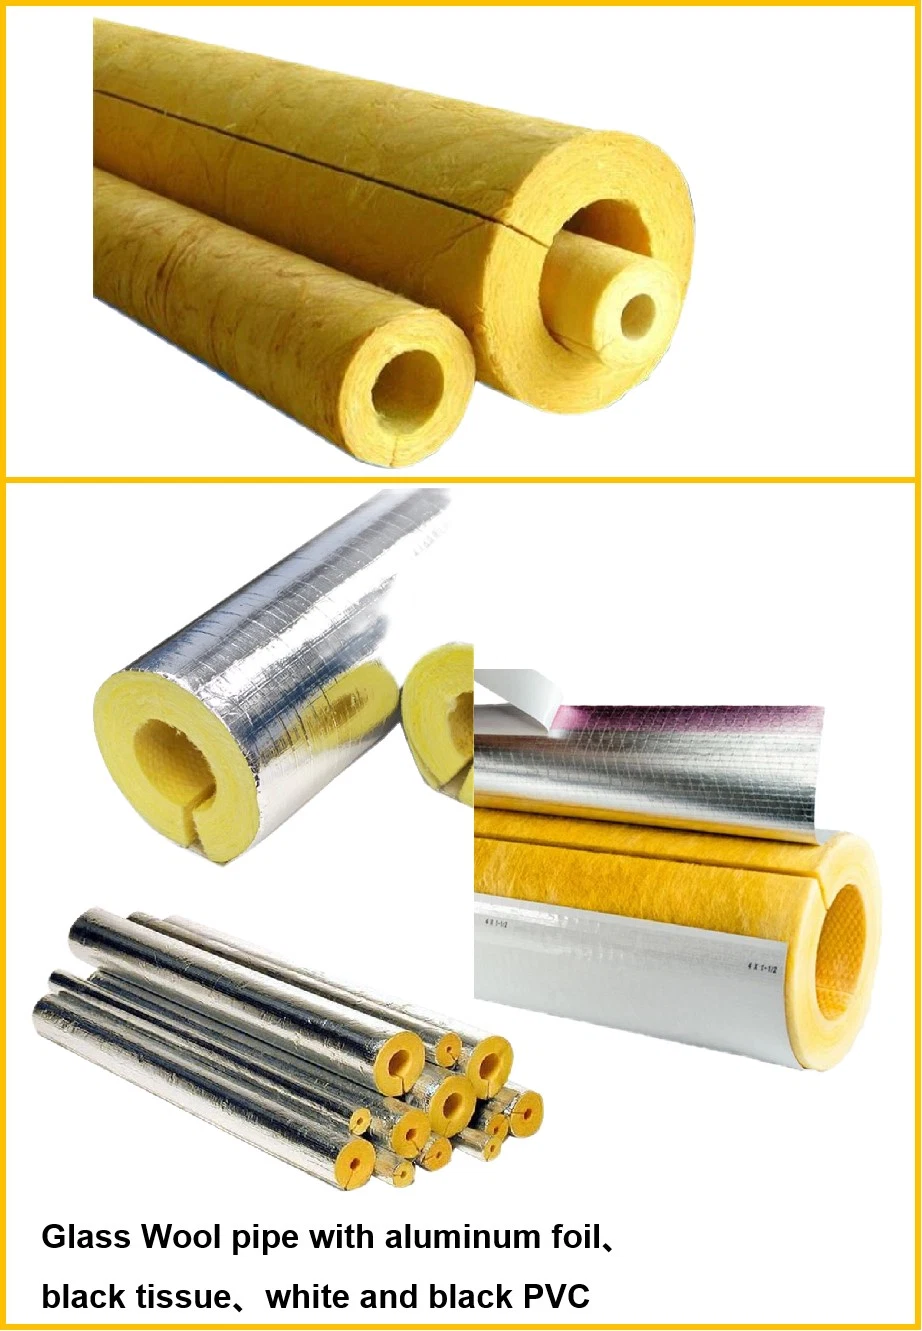 Cheap Fiberglass Insulation Excellent Glass Wool Products for Heat Insulation